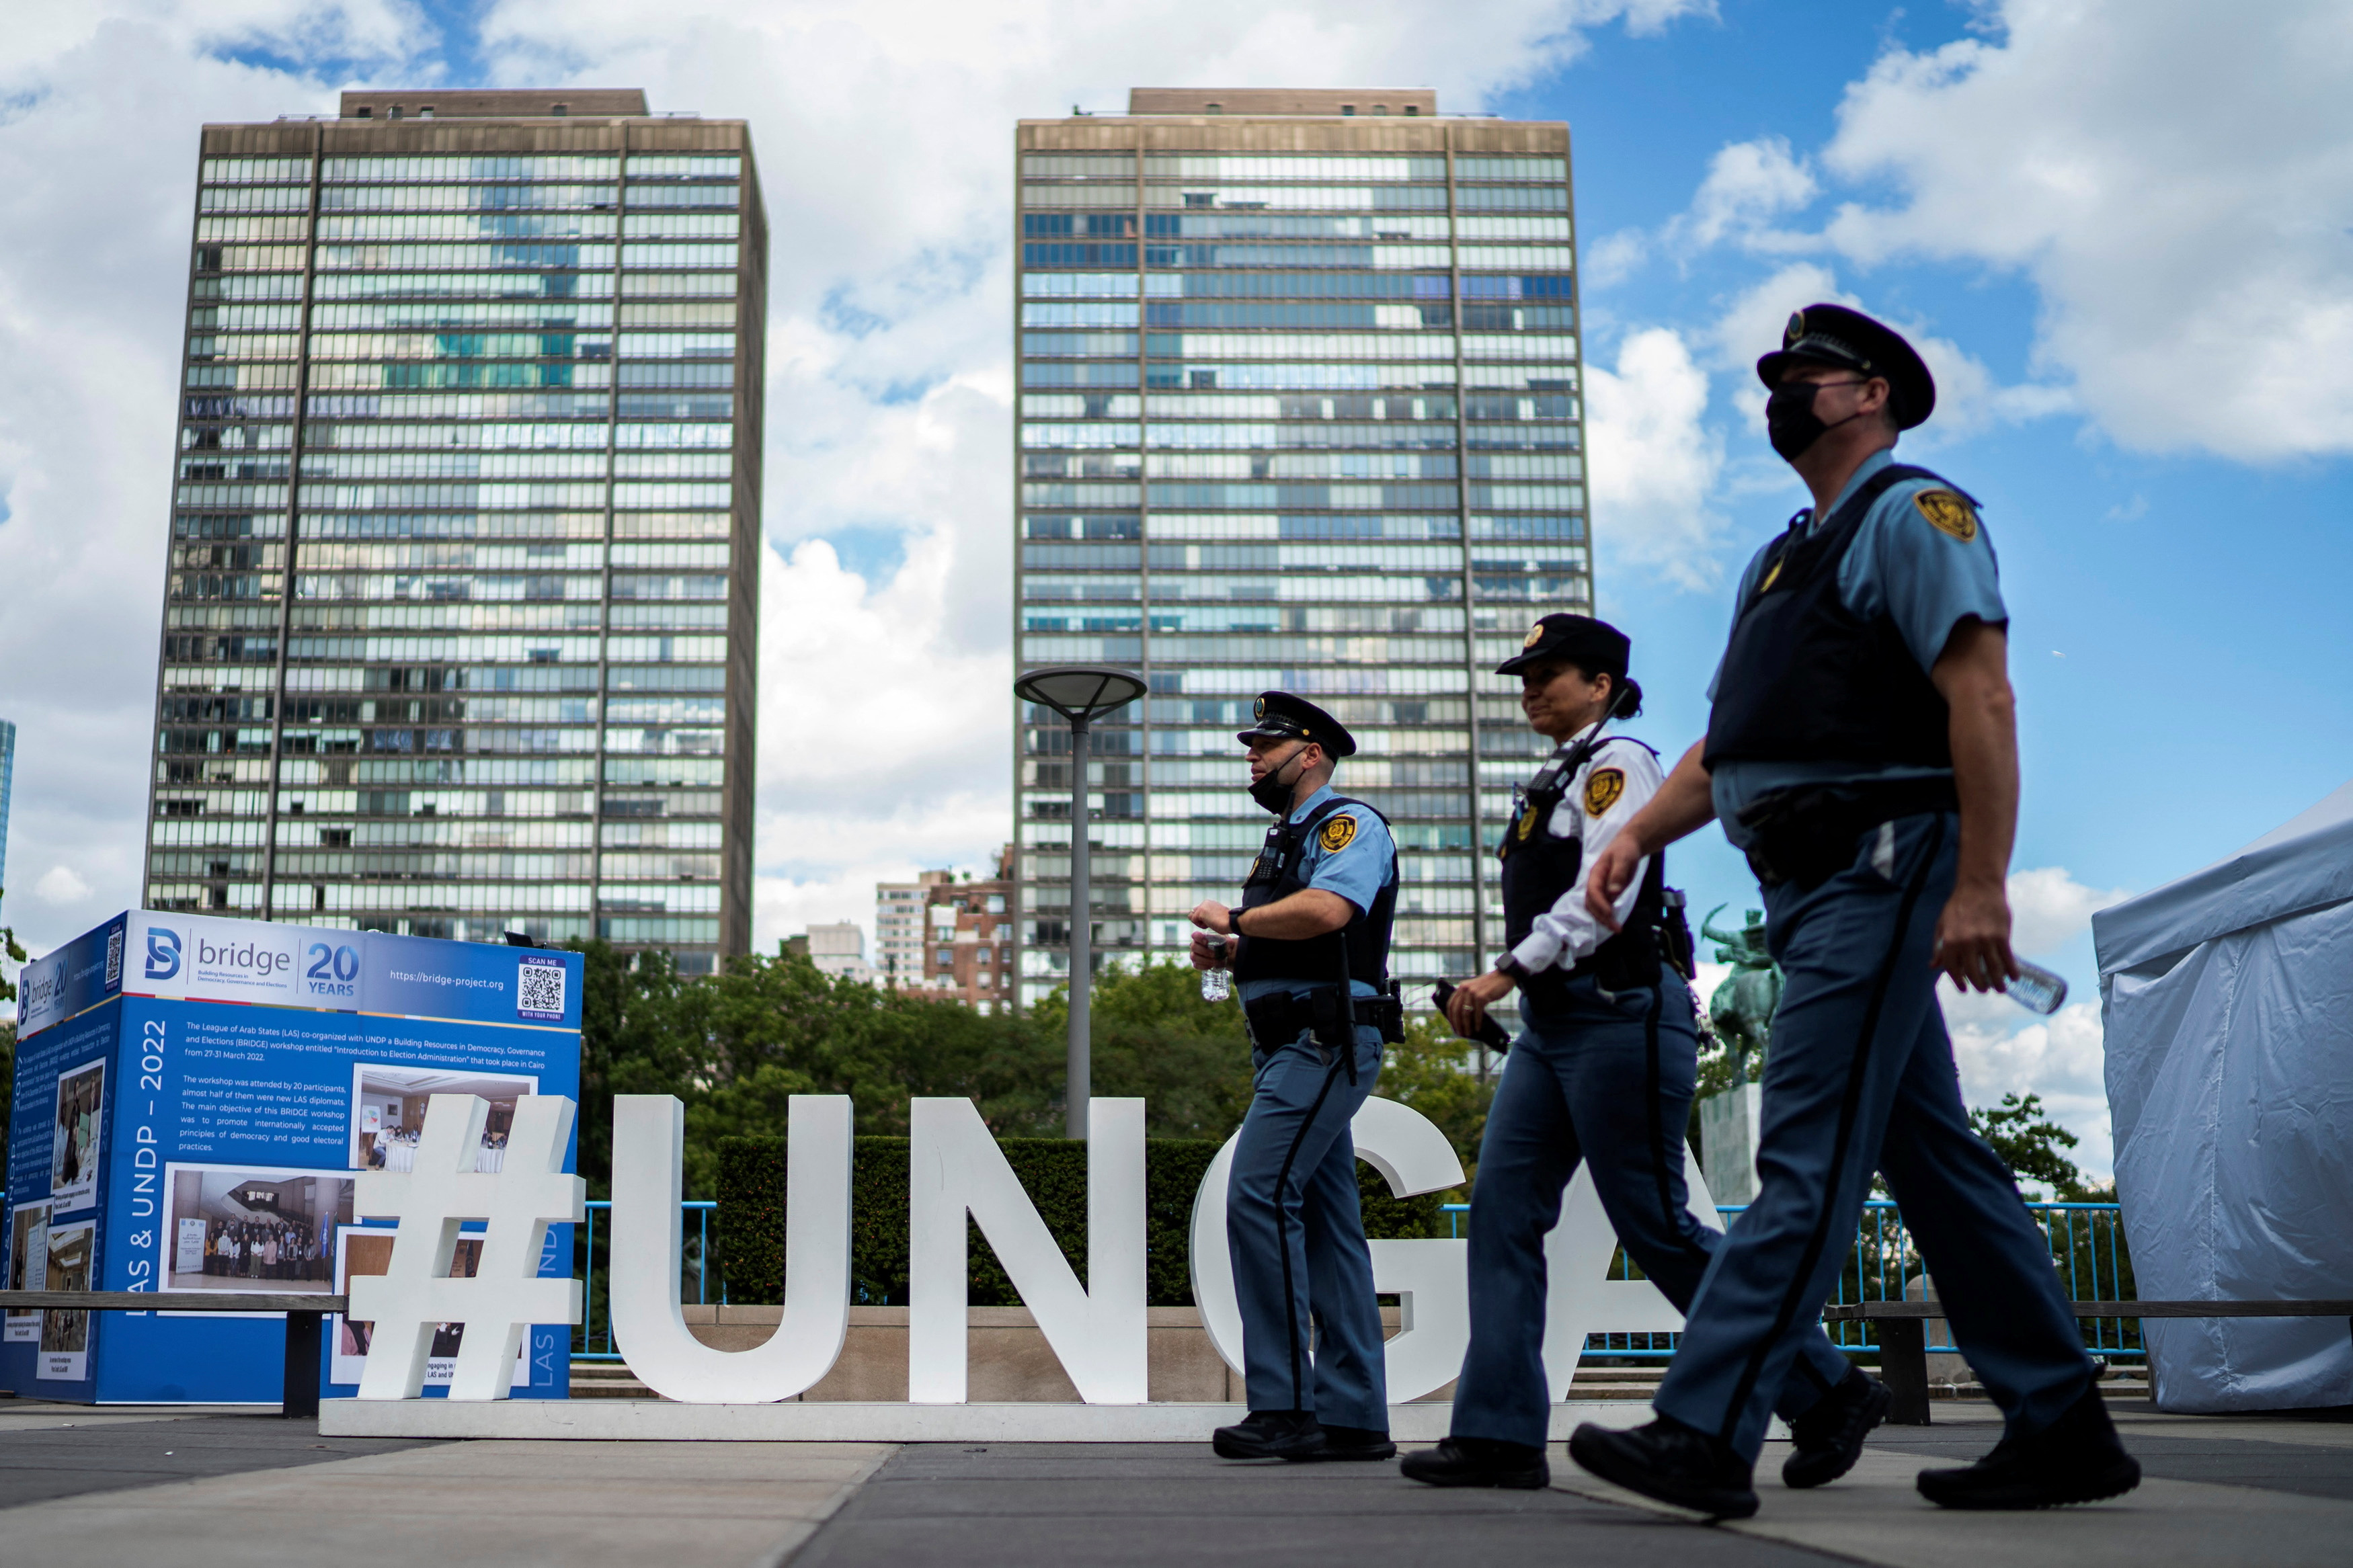 U.N. security members patrol outside the building during the 77th Session of the United Nations General Assembly at U.N. Headquarters in New York City.